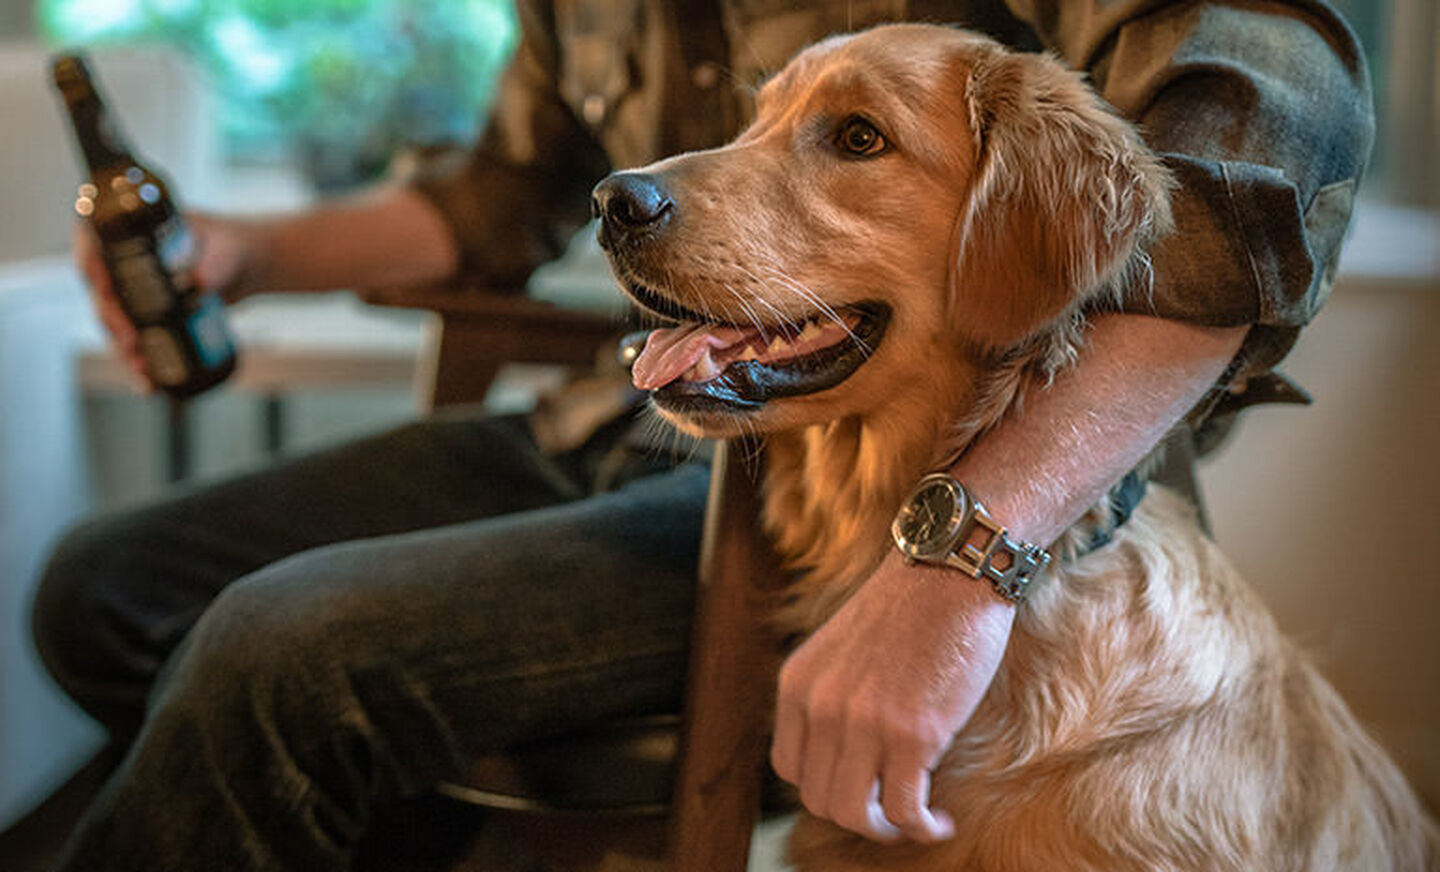 Man sitting with a Tread Tempo LT on his wrist and his arm around his dog